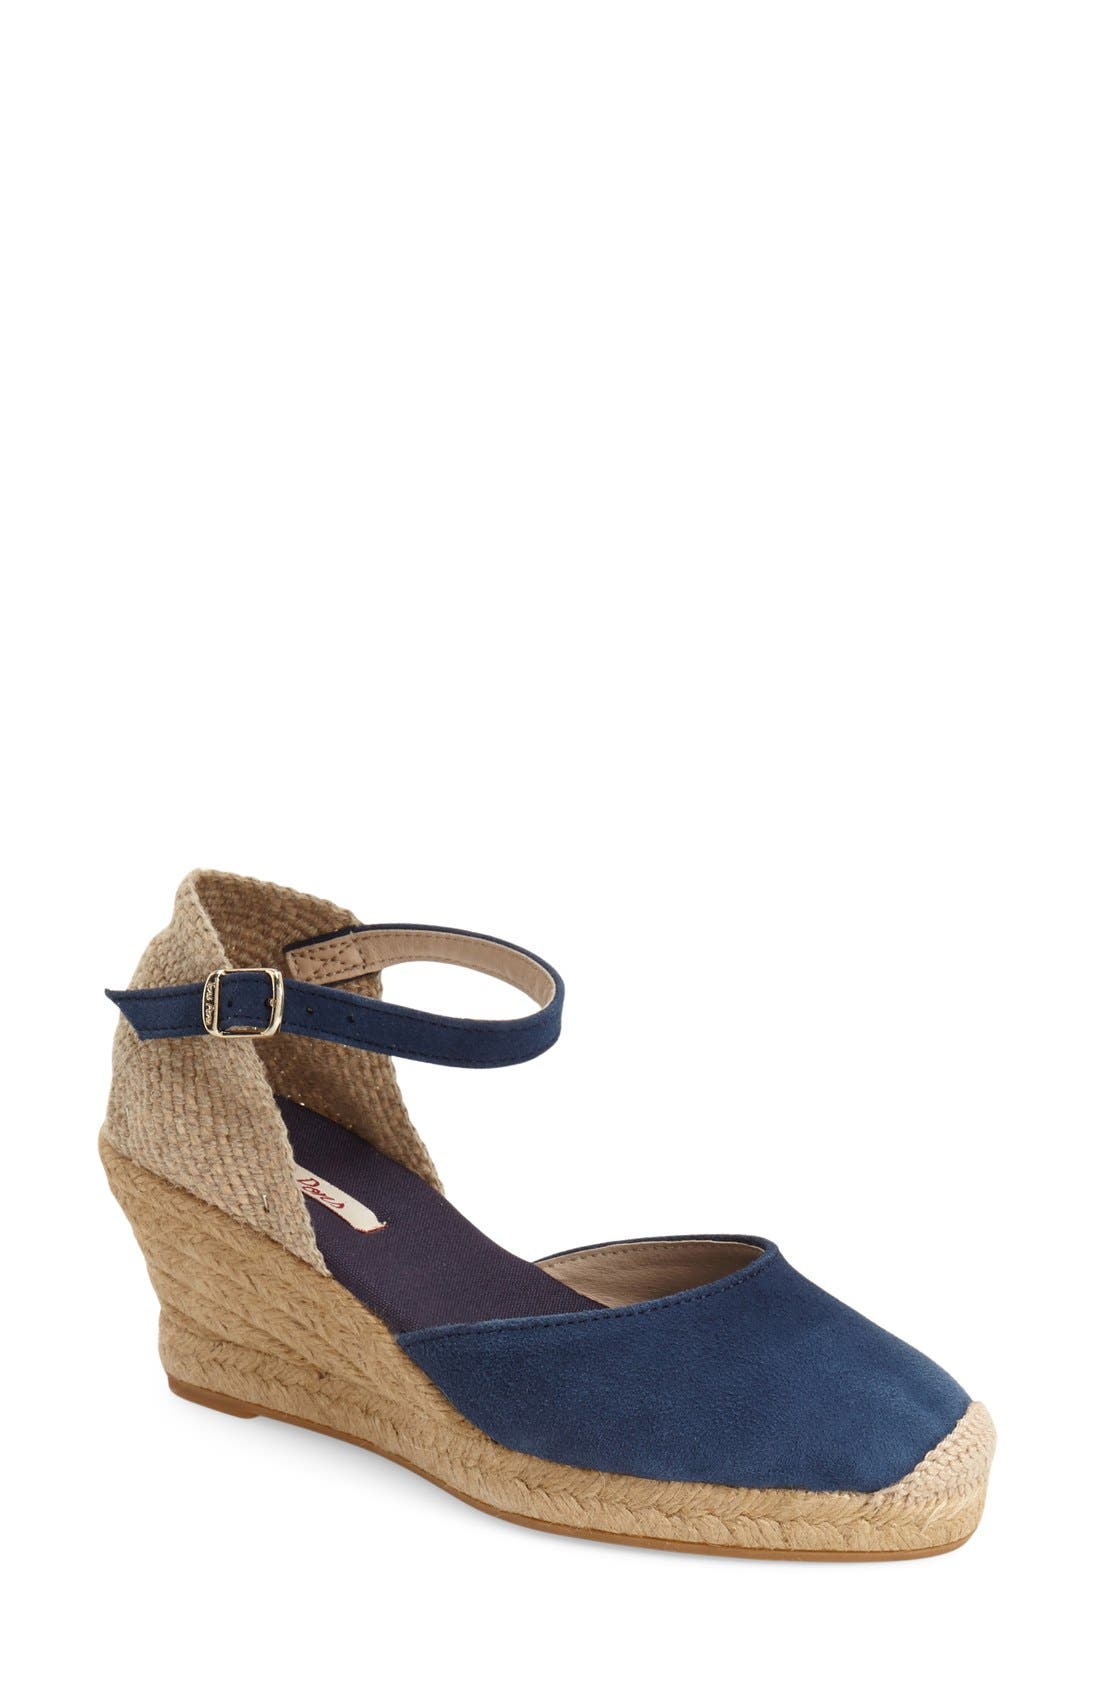 TONI PONS Lloret-5 Stone Suede Leather Womens Wedge Heeled Espadrille Shoes 